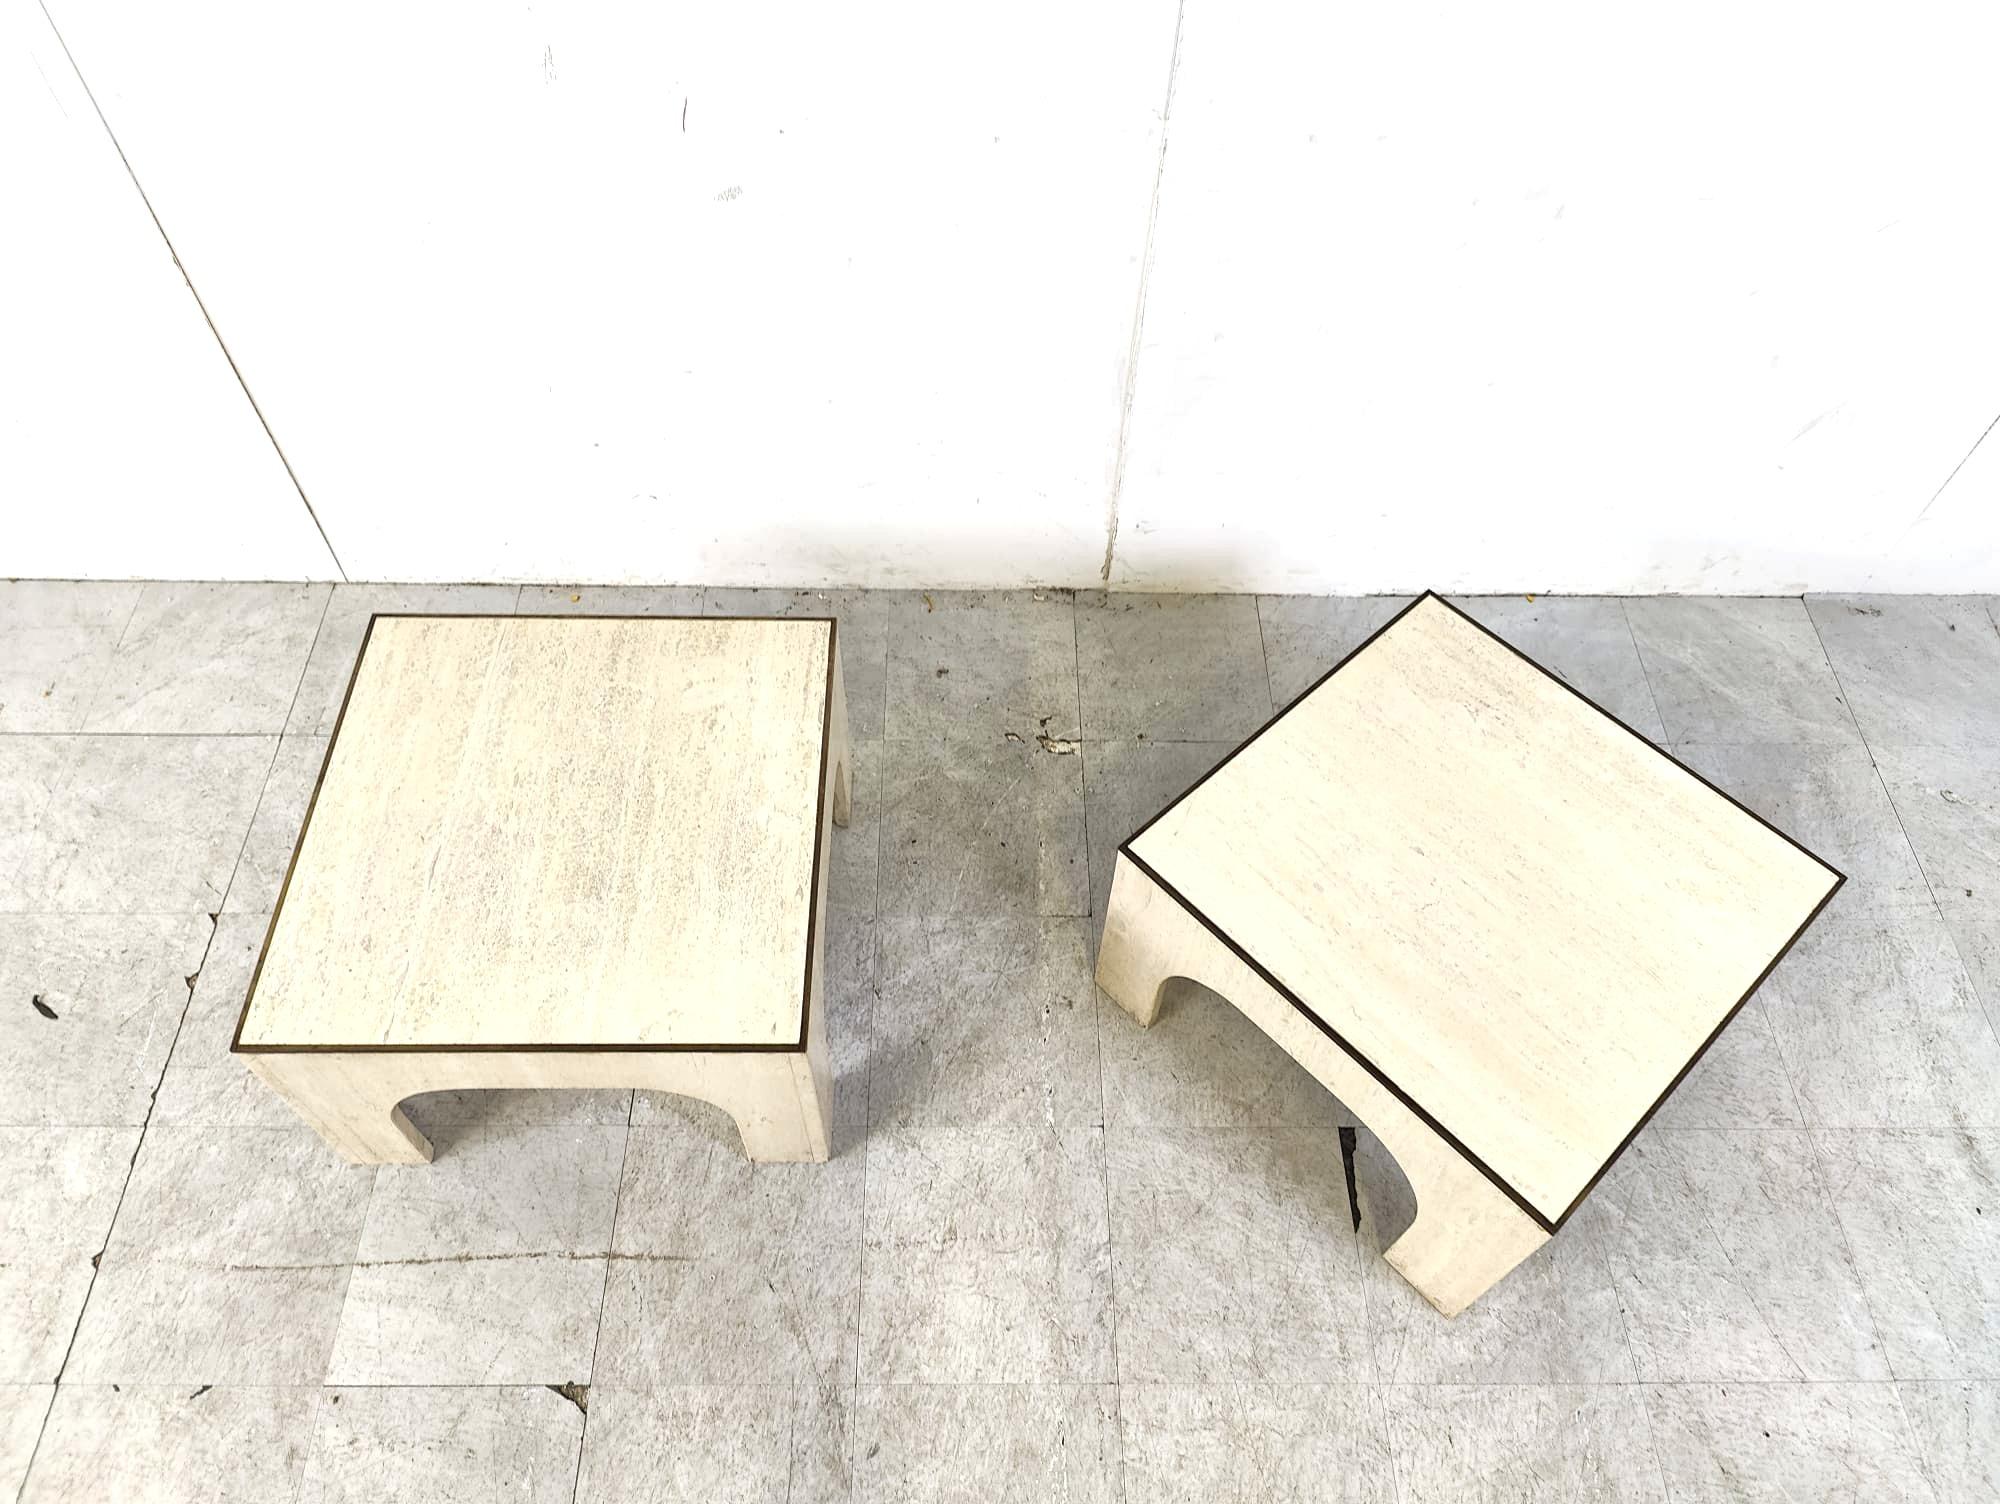 Gorgeous pair of arched leg coffee tables or side tables attributed to WIlly Rizzo.

Made ouf of travertine with a brass finish.

Good condition

1970s - Italy

Dimensions
Height: 36cm
Width x depth: 60cm

Ref.: 165413